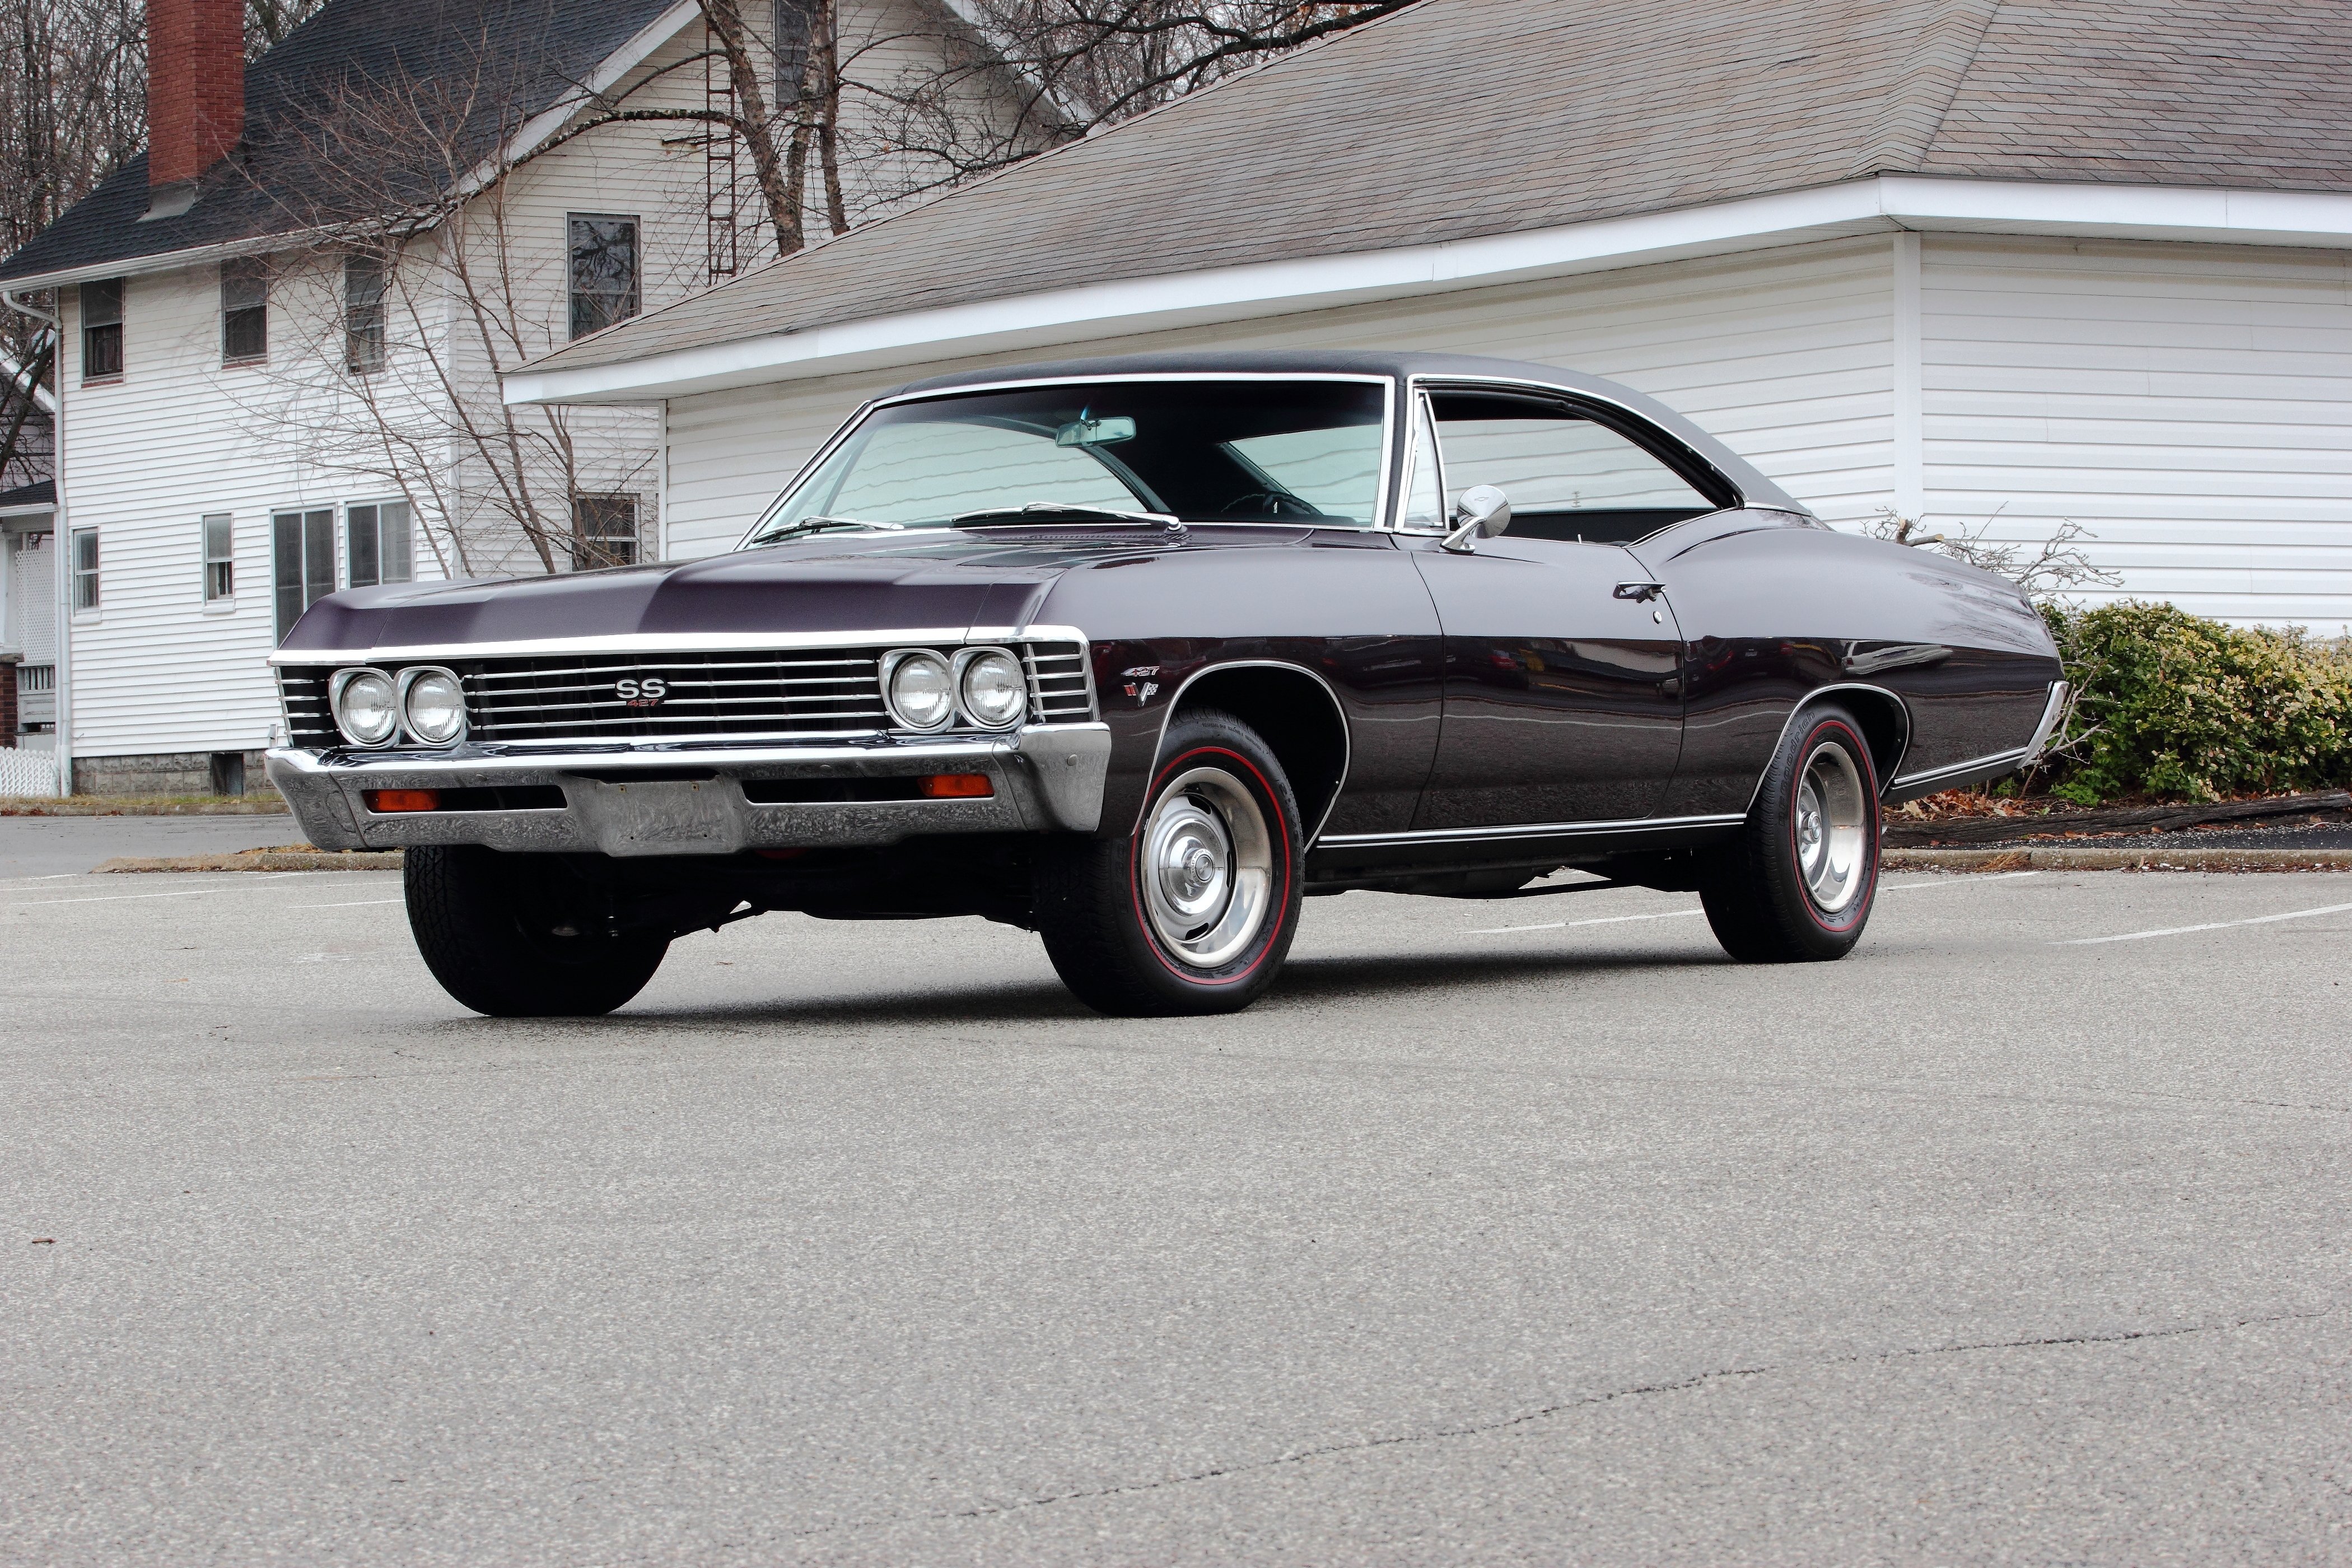 1967, Chevrolet, Impala, Coupe, Ss, 427, Muscle, Classic, Usa